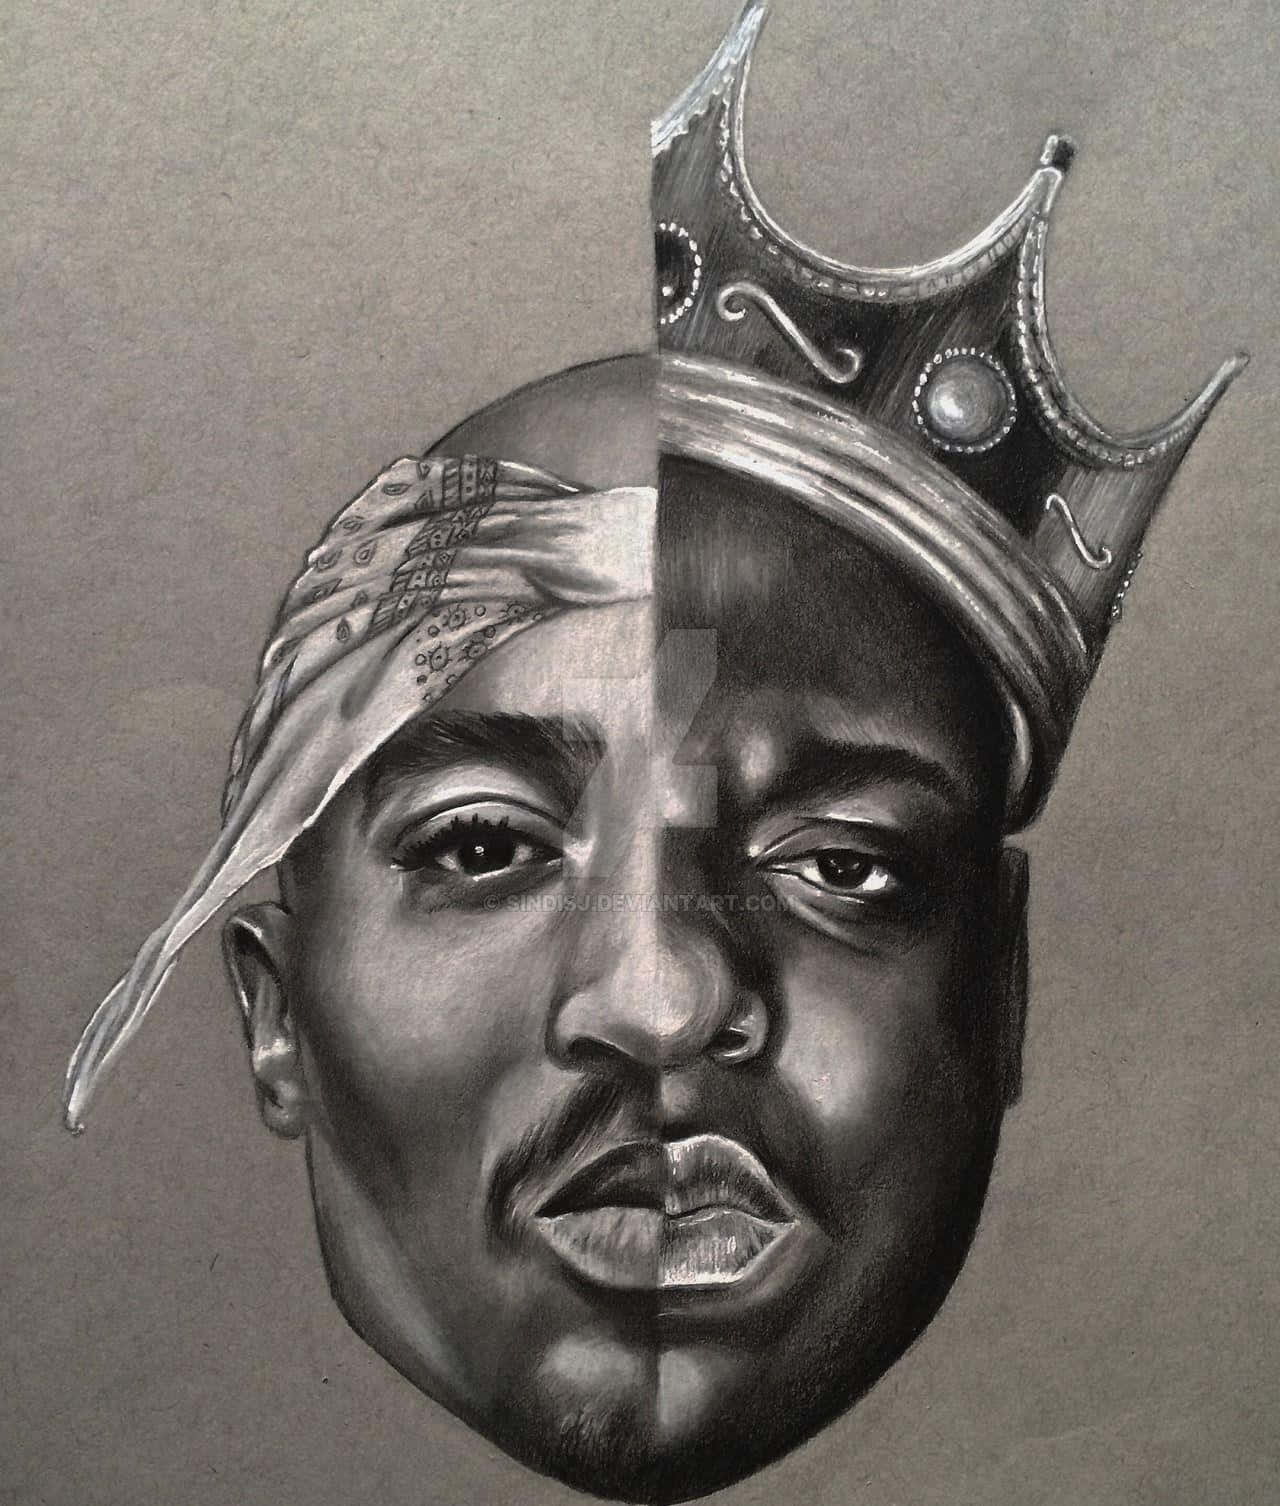 Two legends of hip hop, Tupac Shakur (2Pac) and Notorious B.I.G. Wallpaper